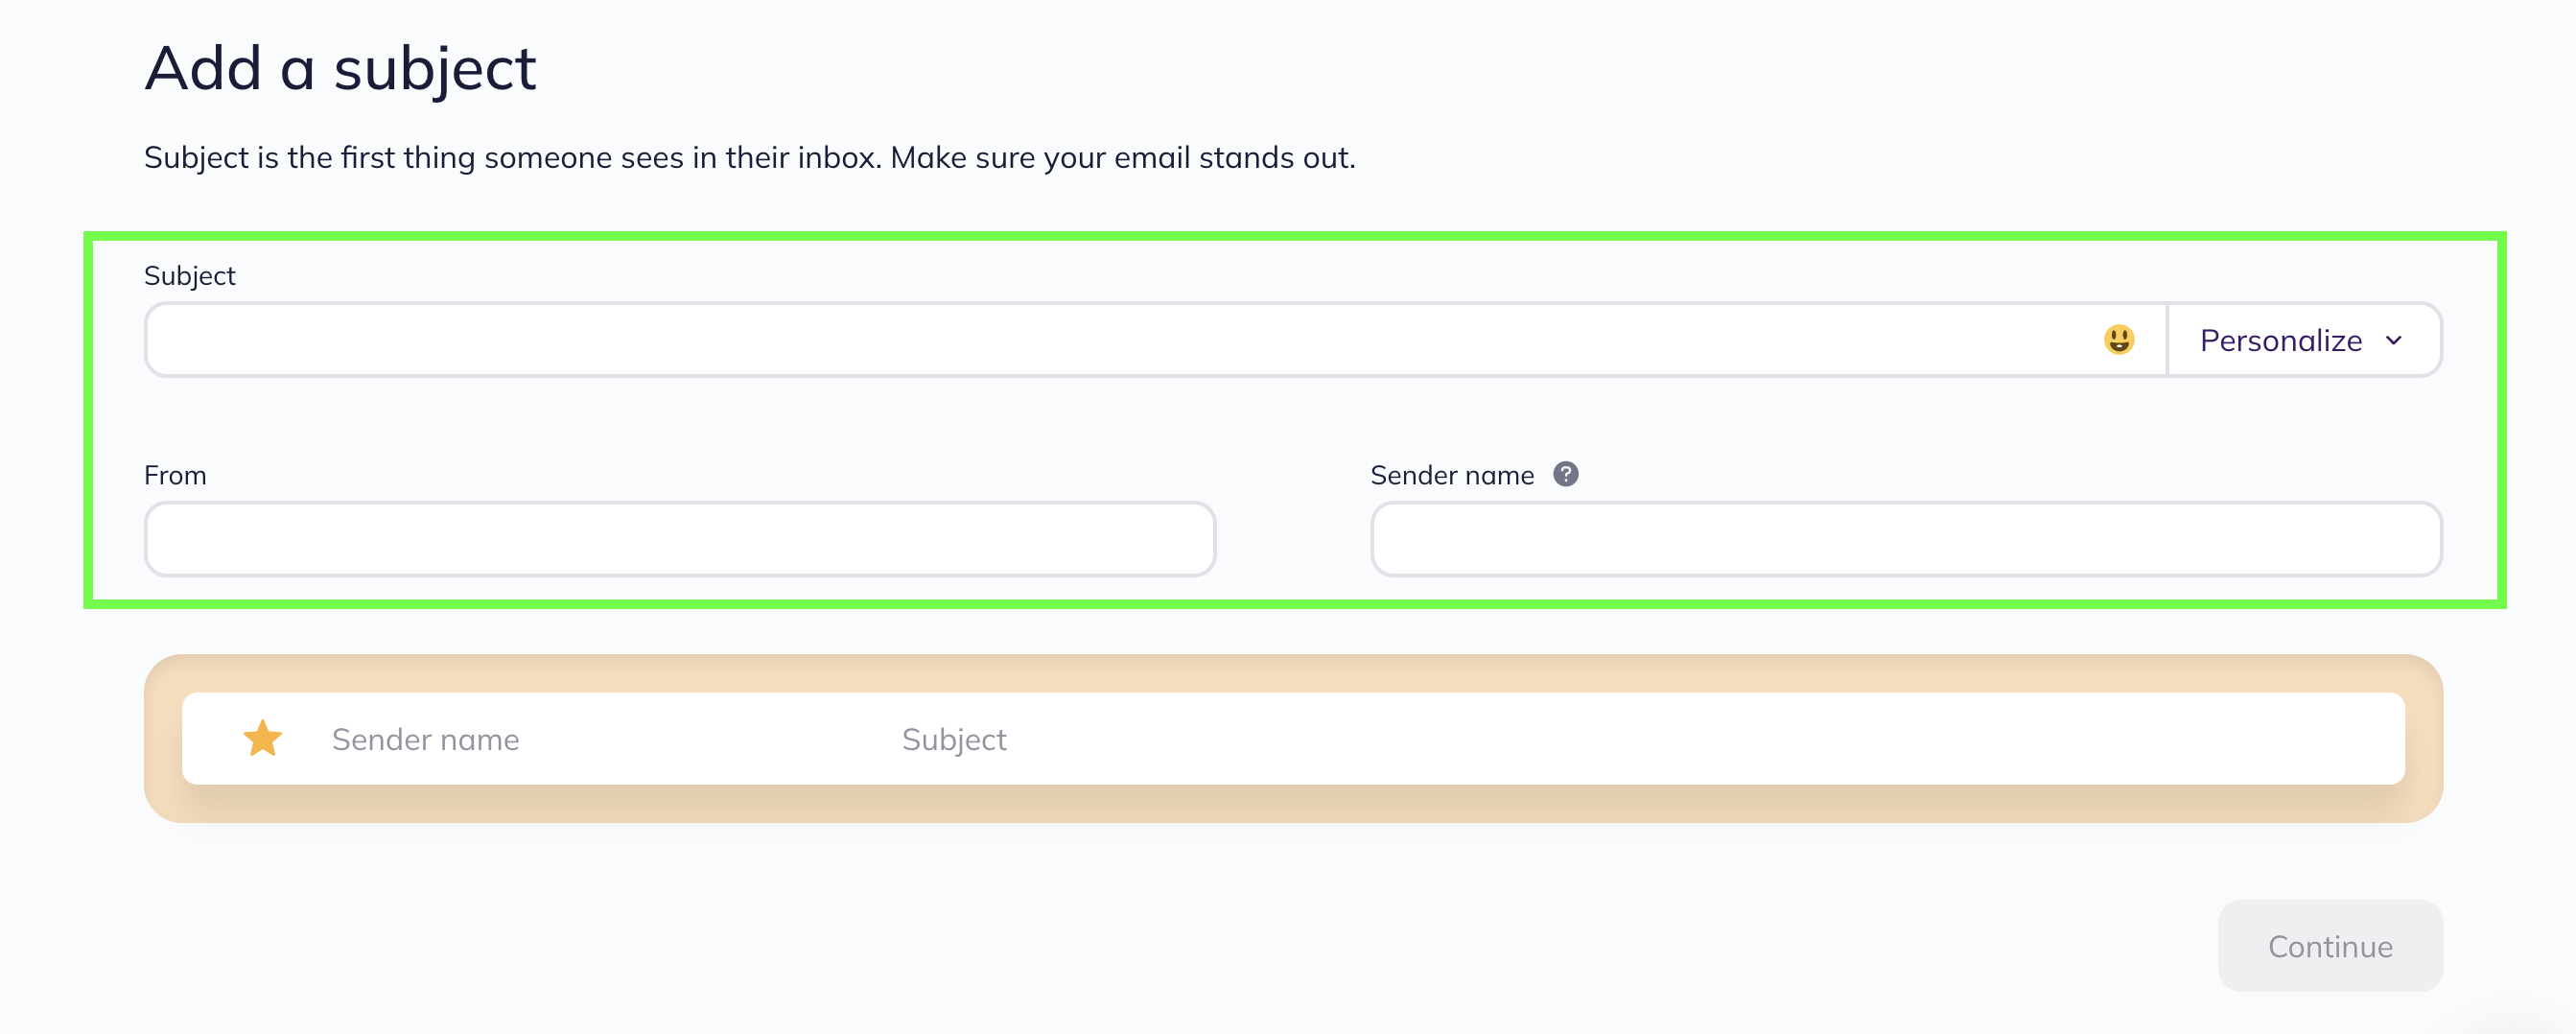 Add a subject line, a sender email, and a sender name and check the results on the preview.